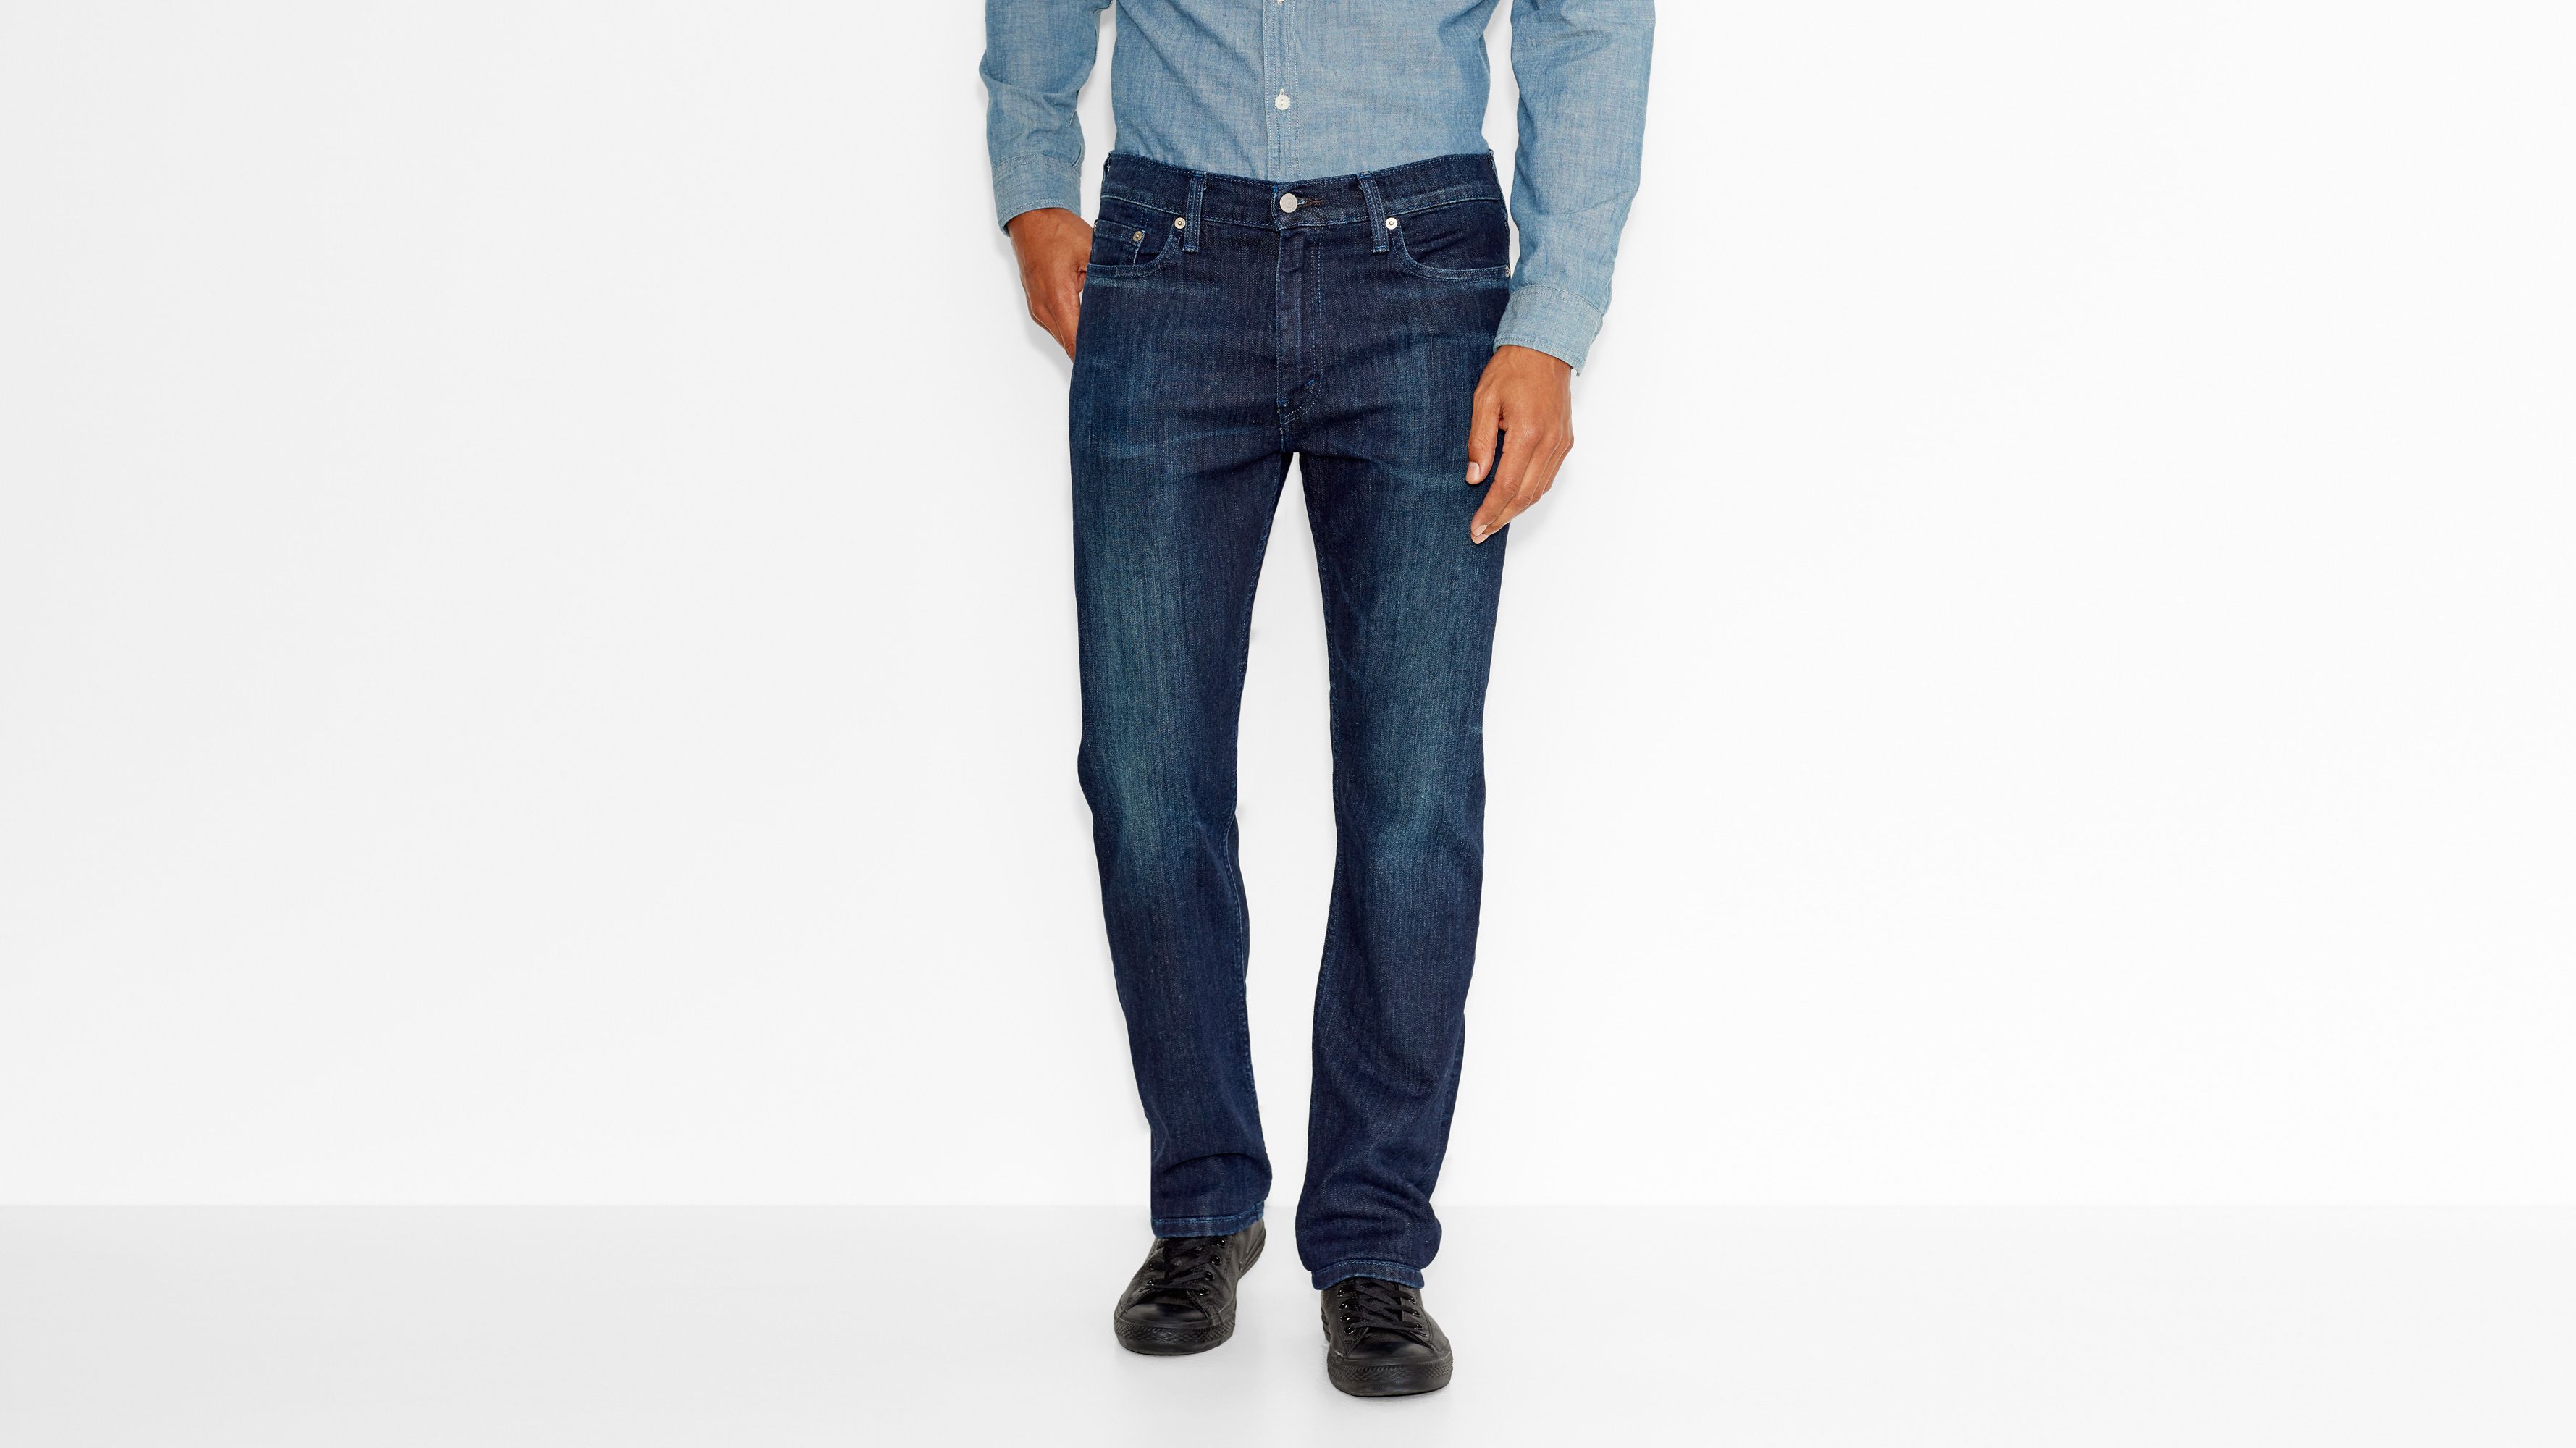 levis 513 straight fit jeans